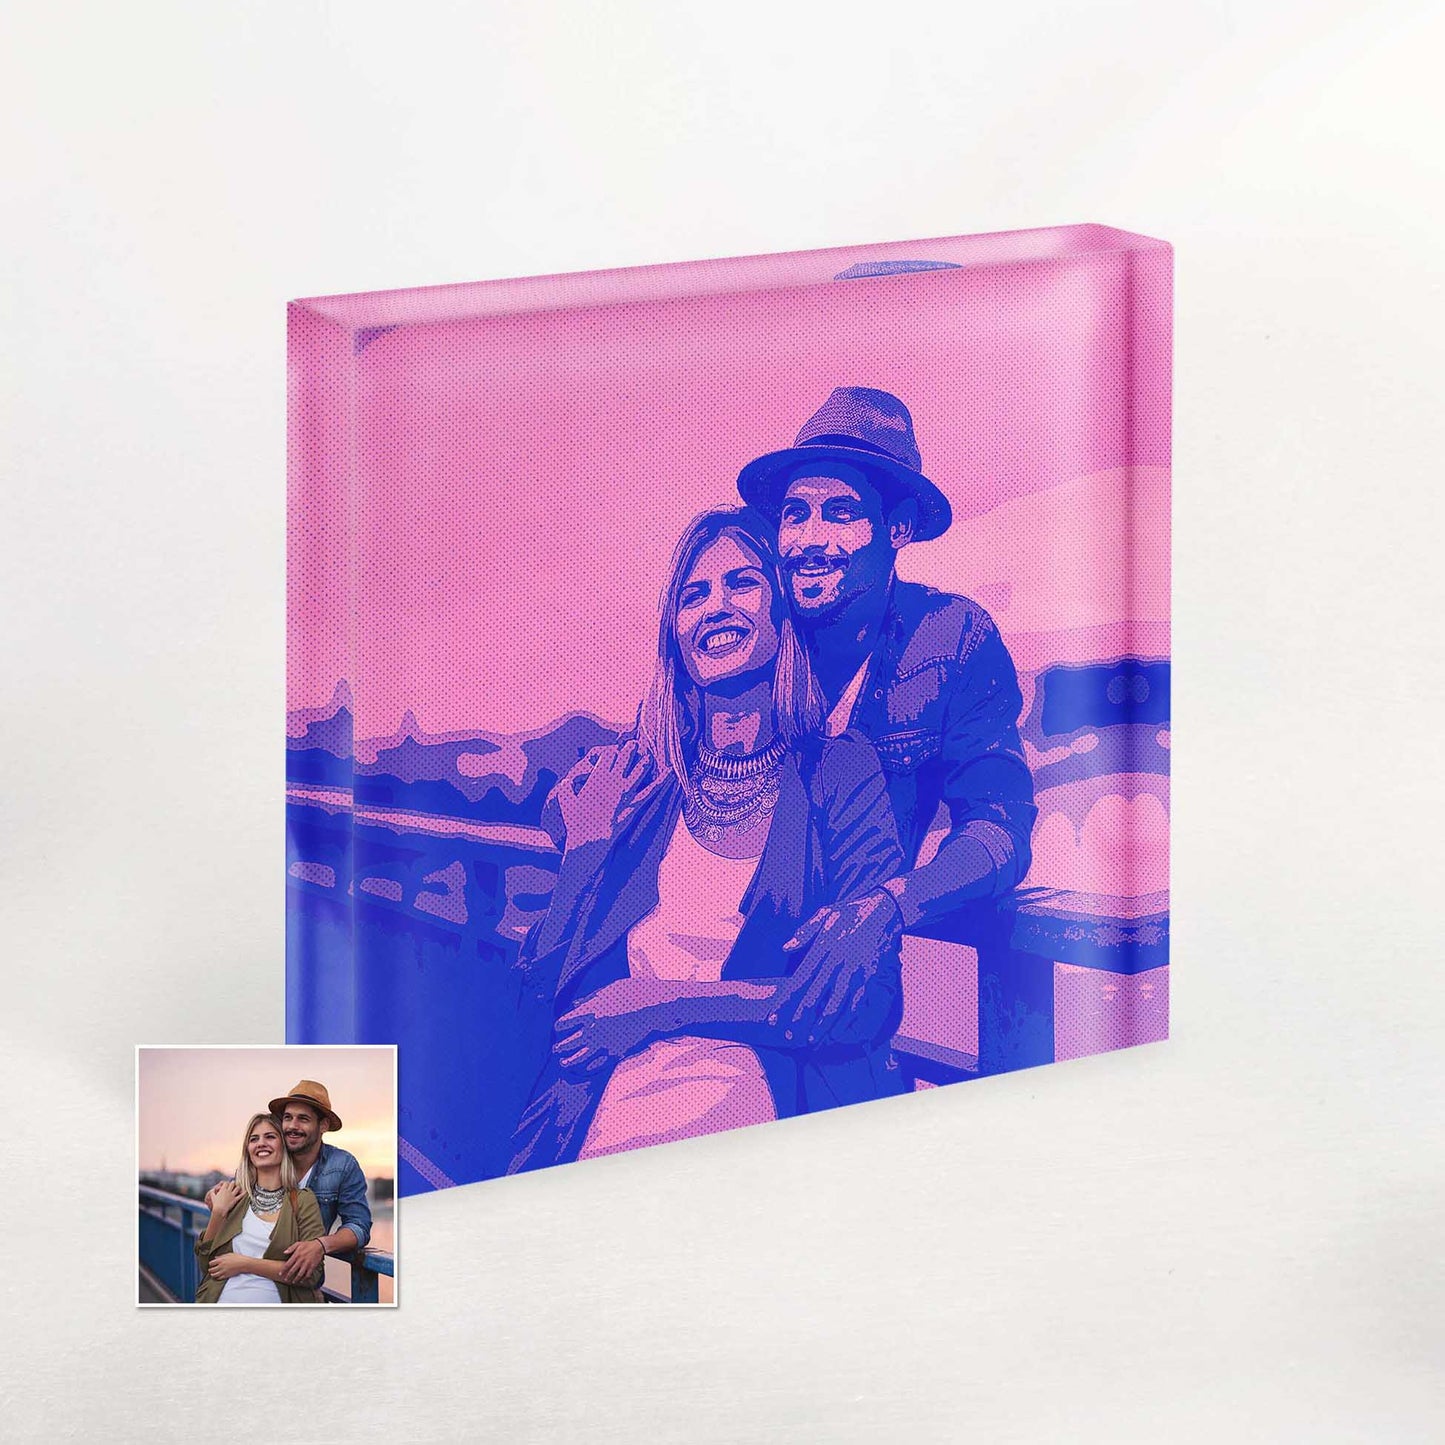 Surprise your loved ones with our Personalised Purple and Pink Comic Acrylic Block Photo. Its cool and vibrant comic cartoon style makes it a trendy and original gift, showcasing your thoughtfulness and love for unique and hip novelties.